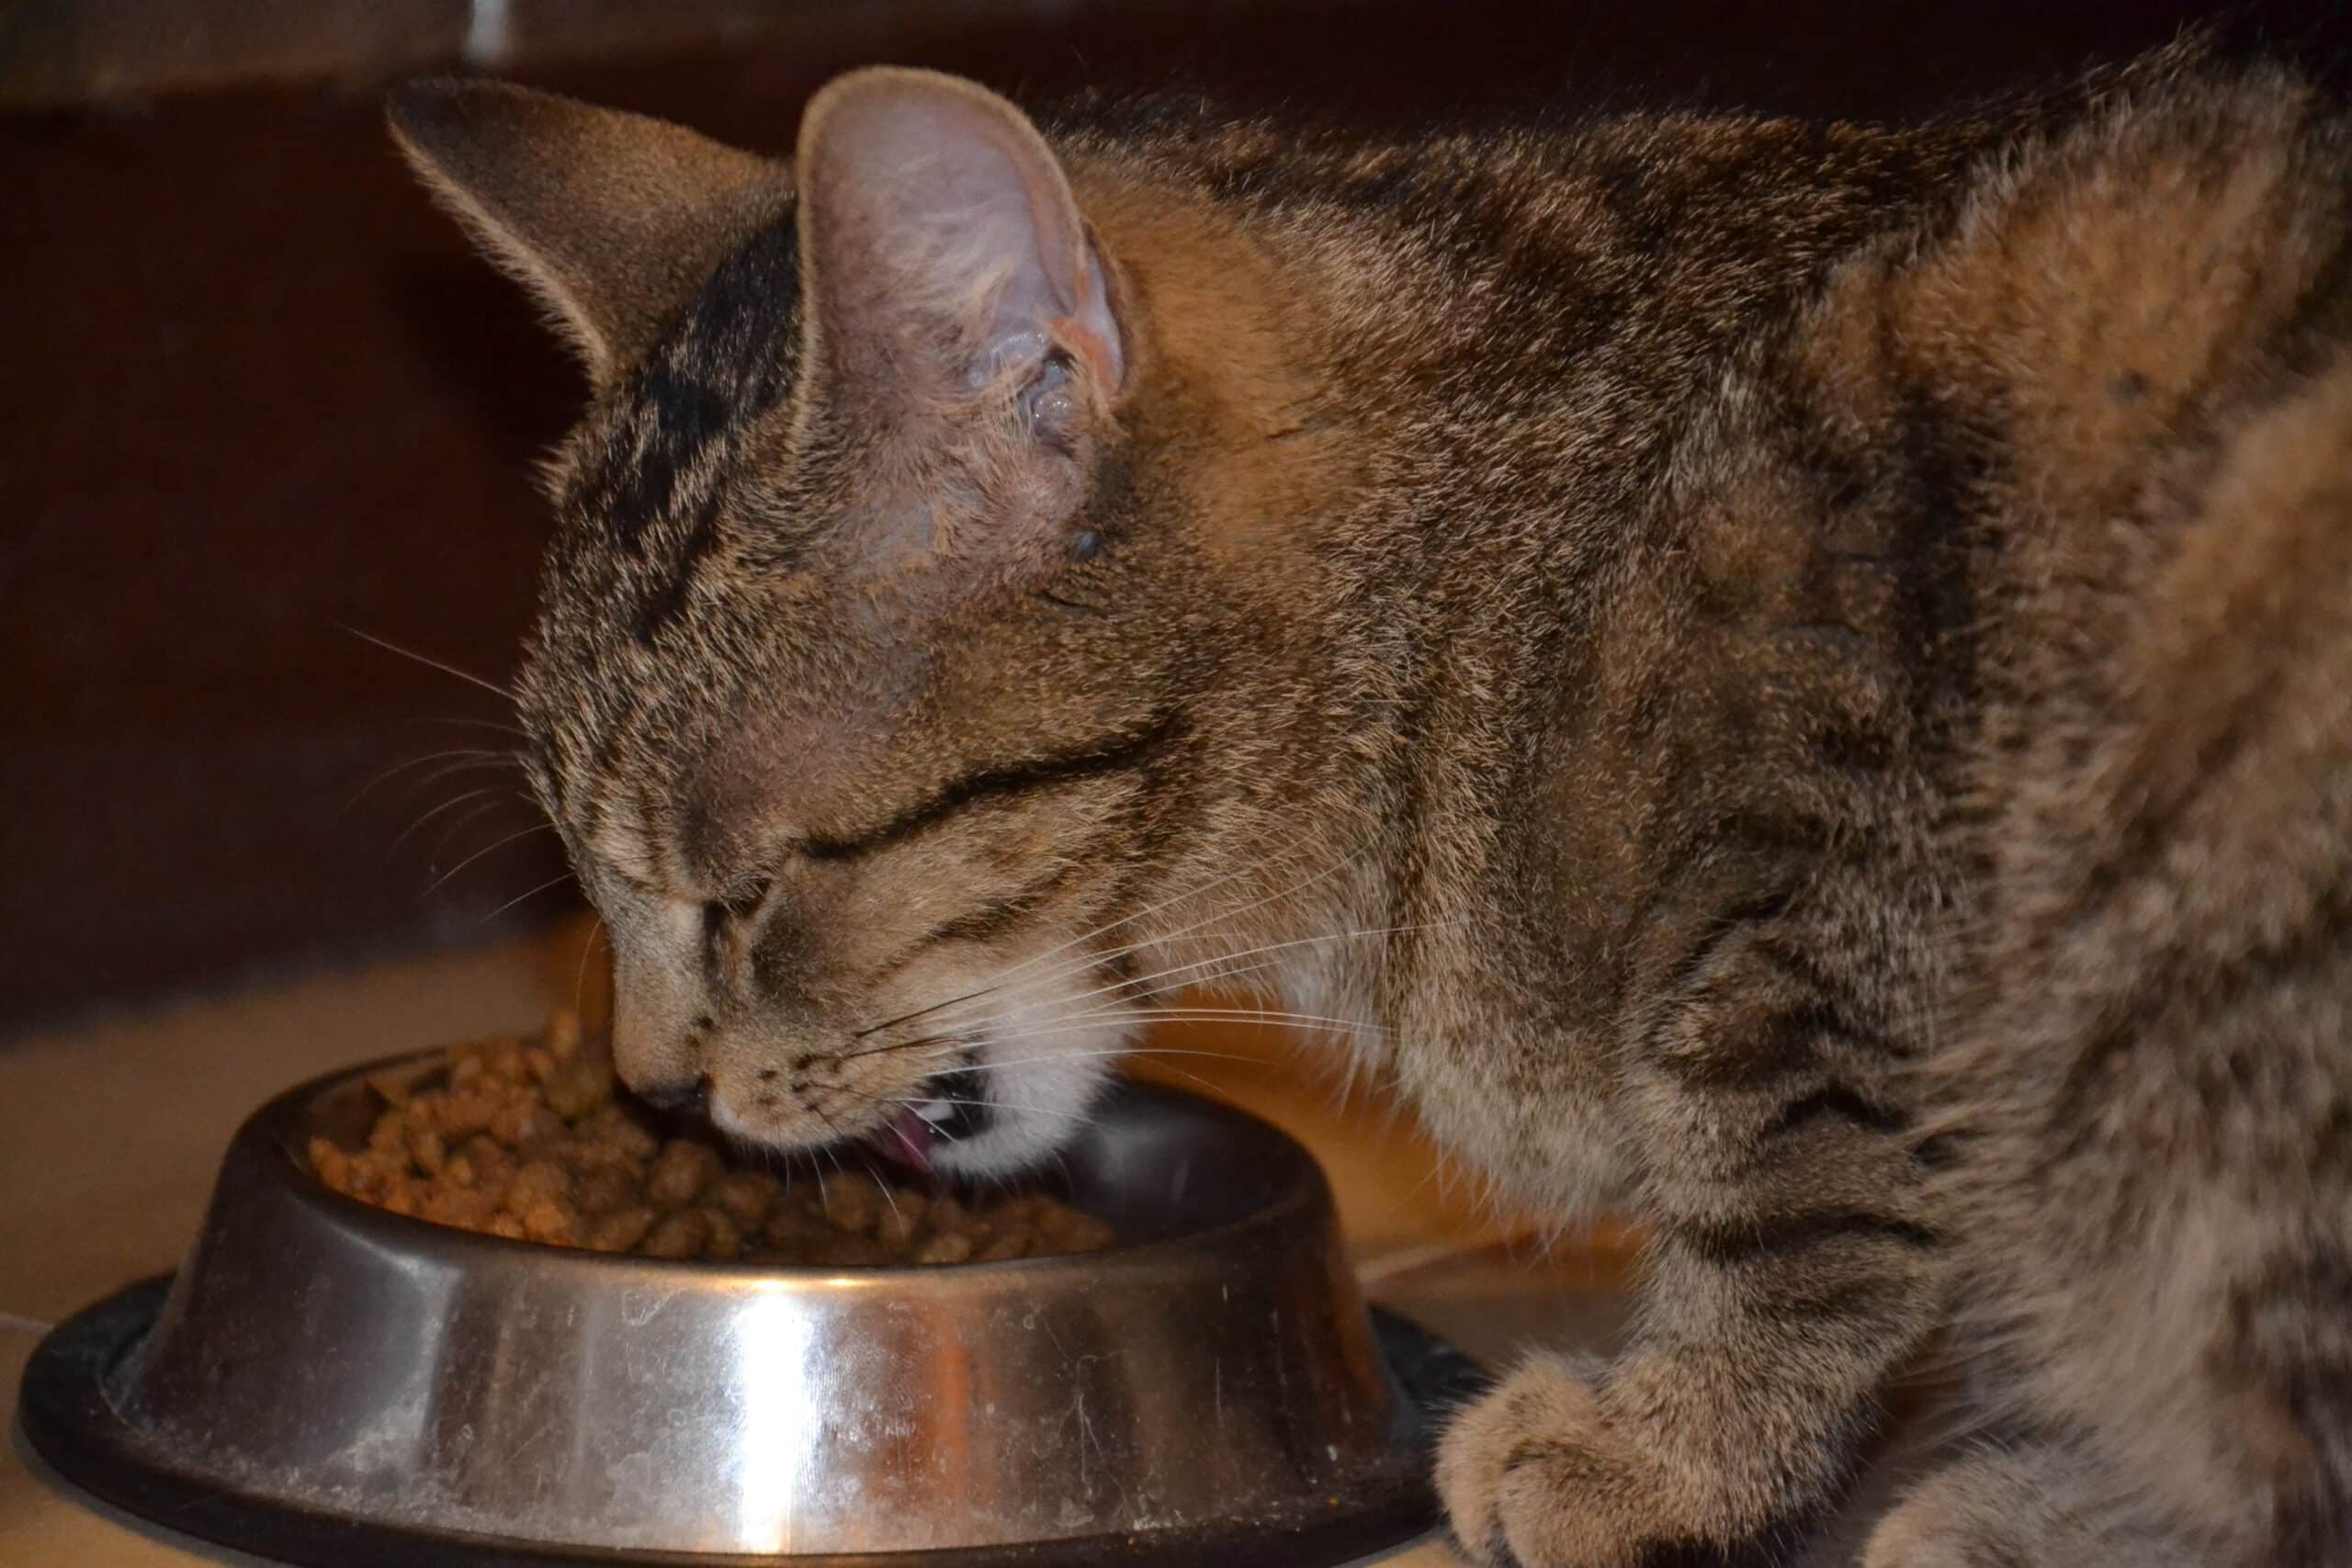 cat eating - Mirtazapine is a popular appetite stimulant for cats